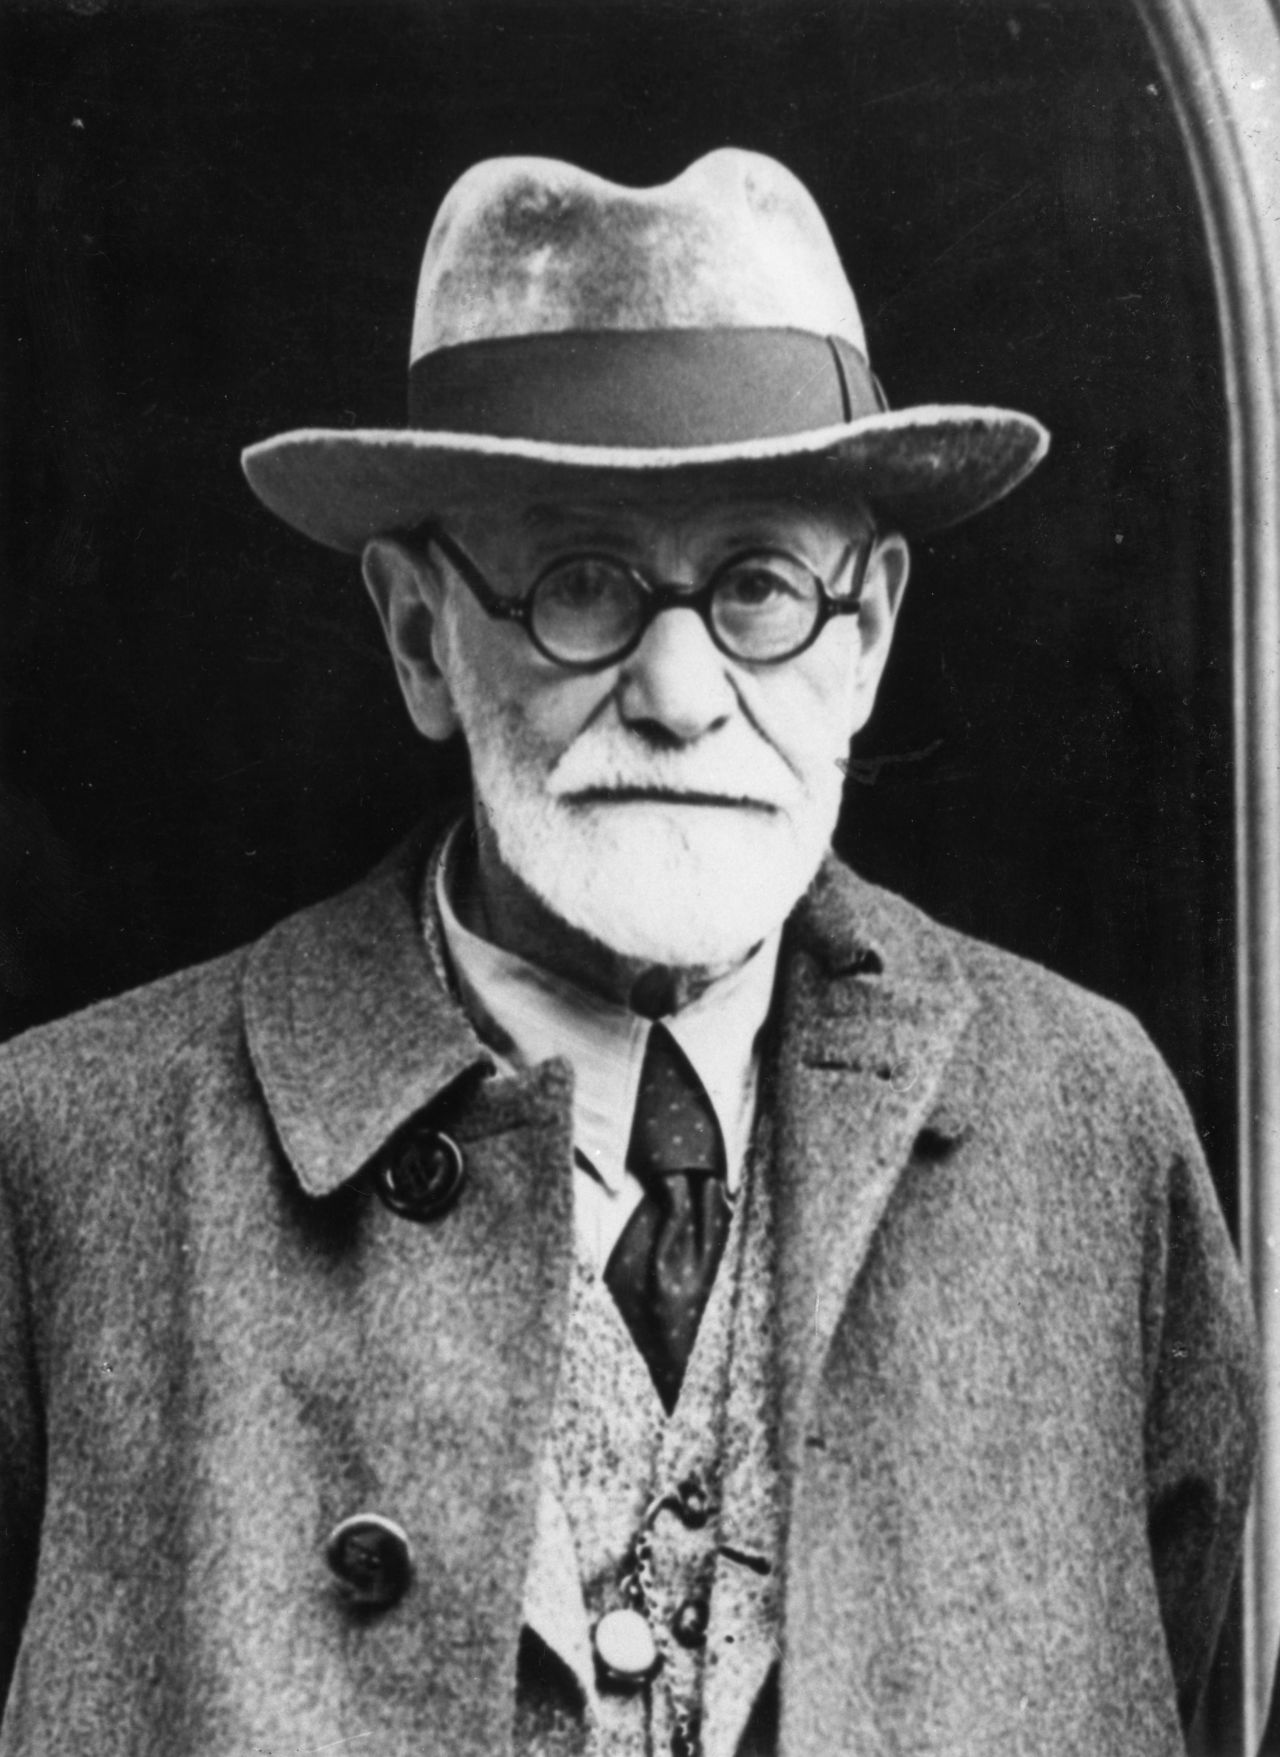 Sigmund Freud is hailed as one of the greatest thinkers of the 20th century. He and others laid the foundation for modern mental health practice. The field of psychoanalysis stays closer to his original ideas than other branches of psychology. 